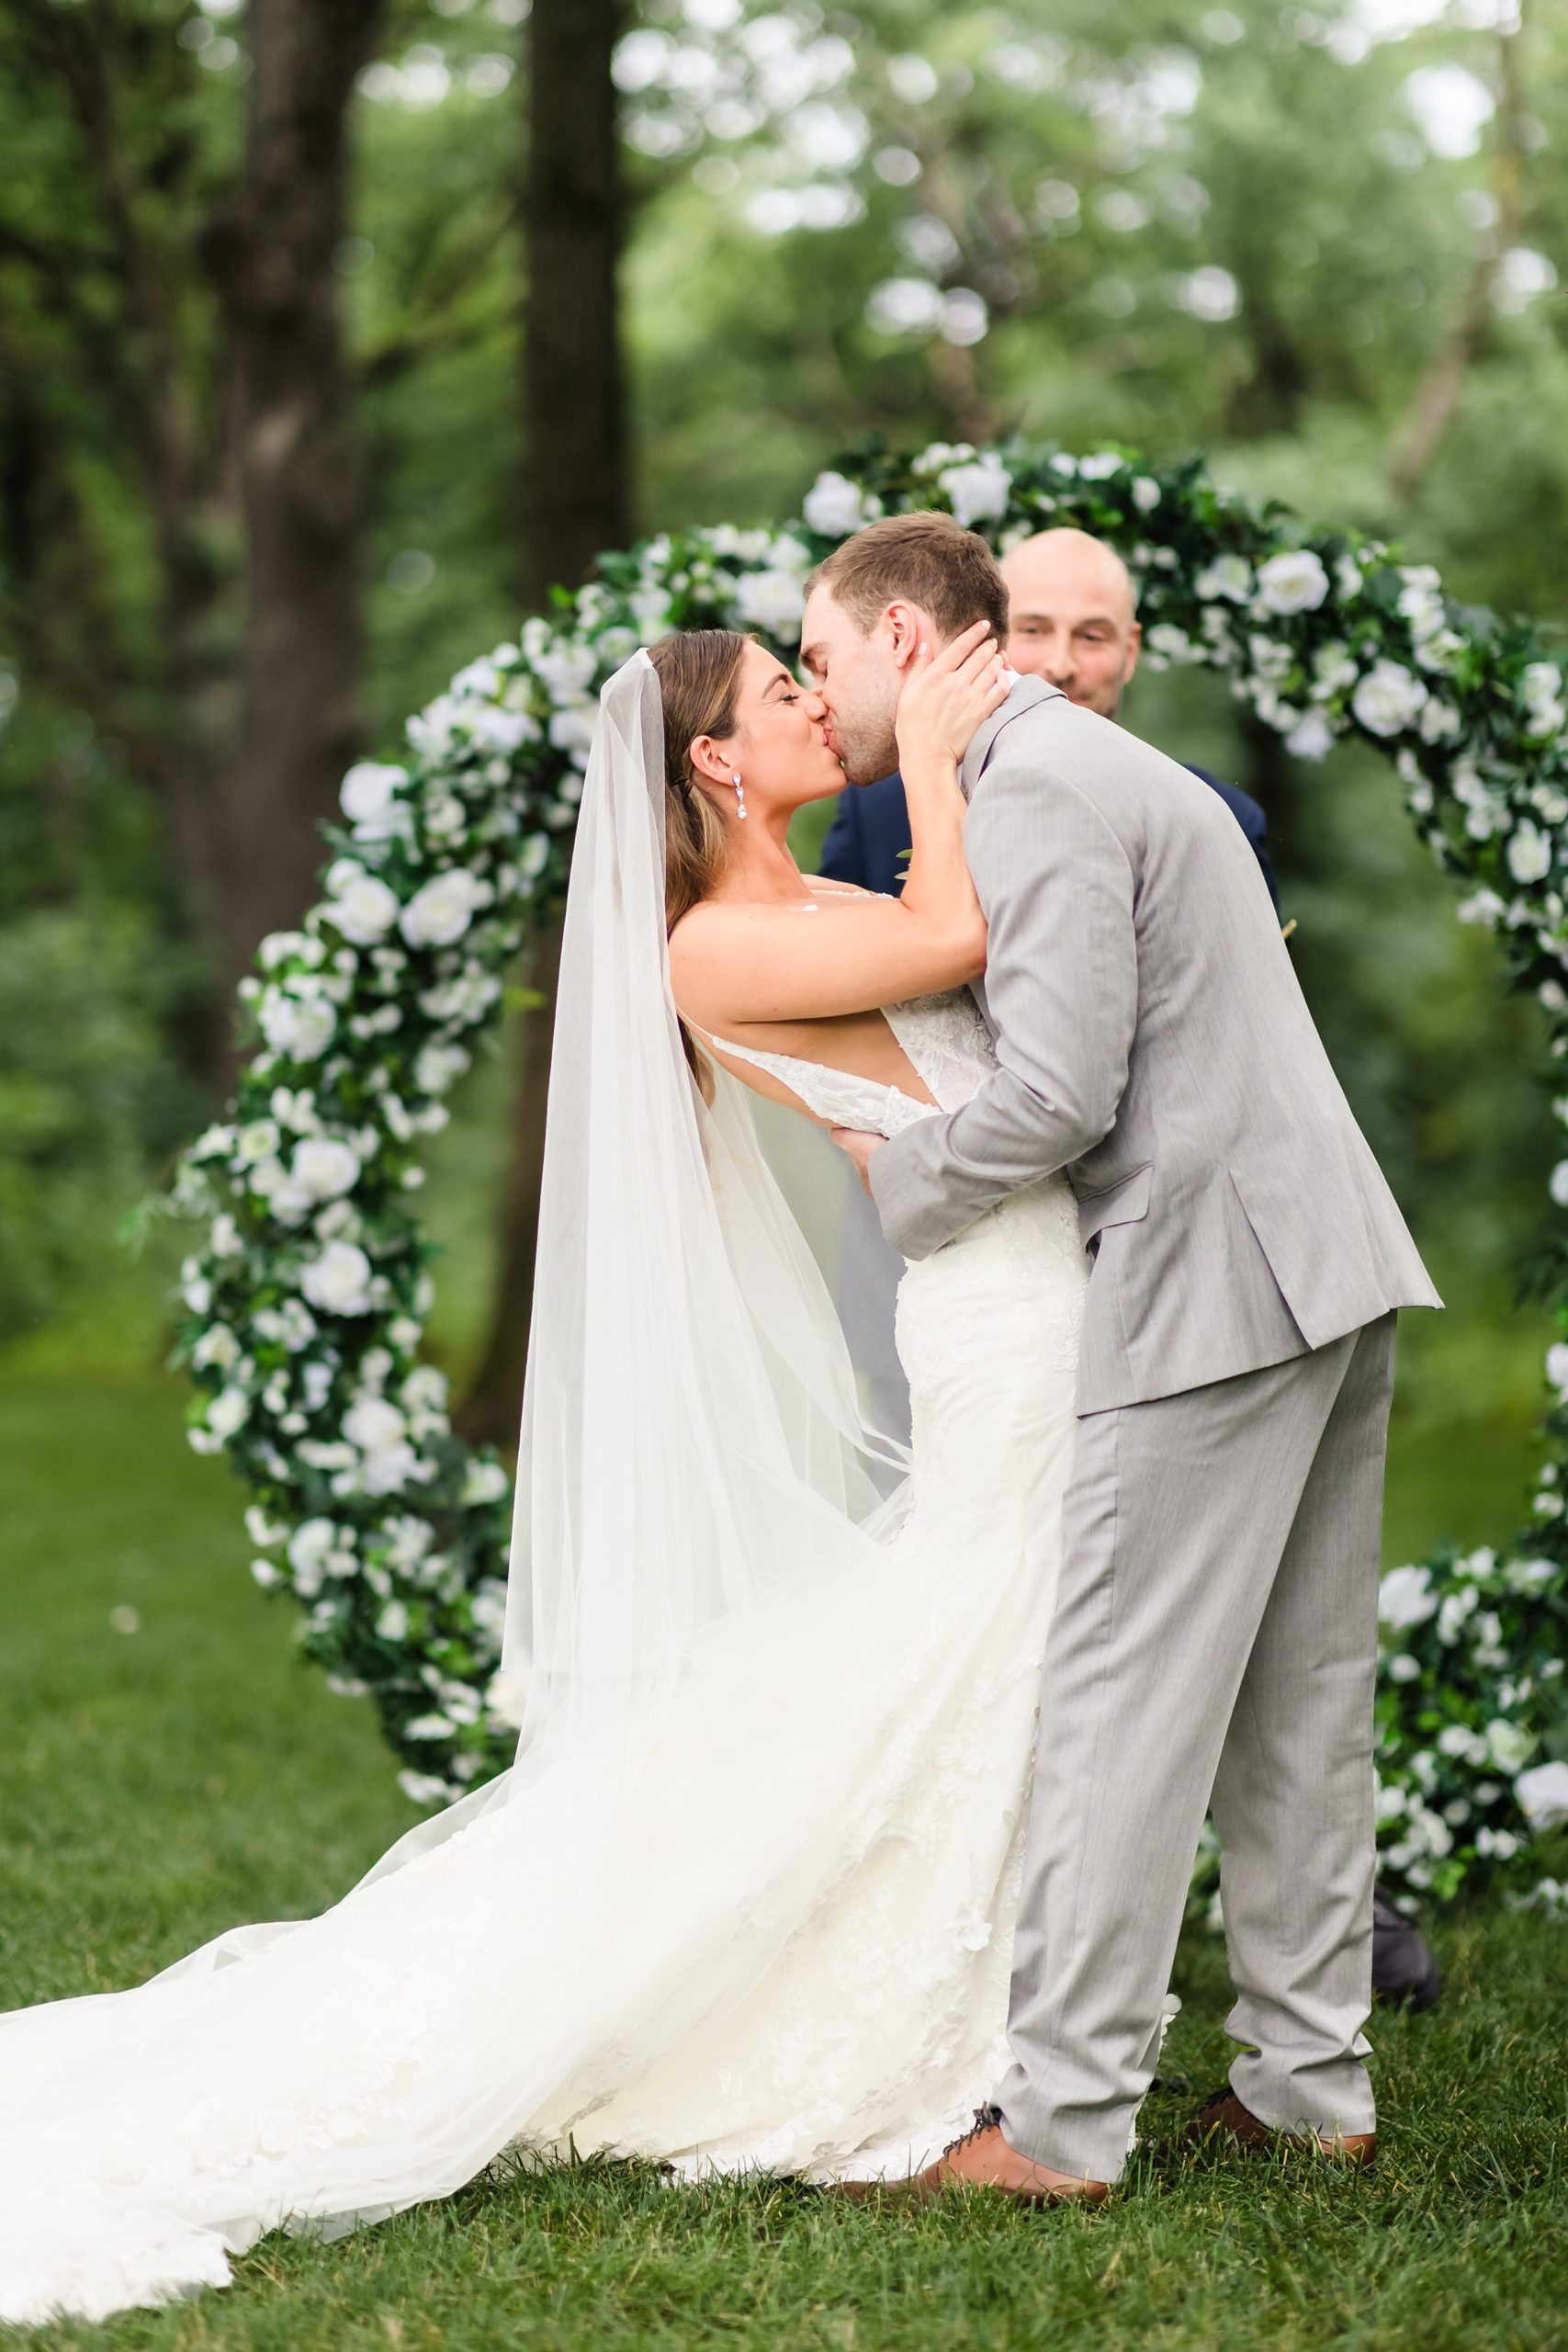 The first kiss during a wedding ceremony at the Monte Bello Estate in Lemont, Illinois